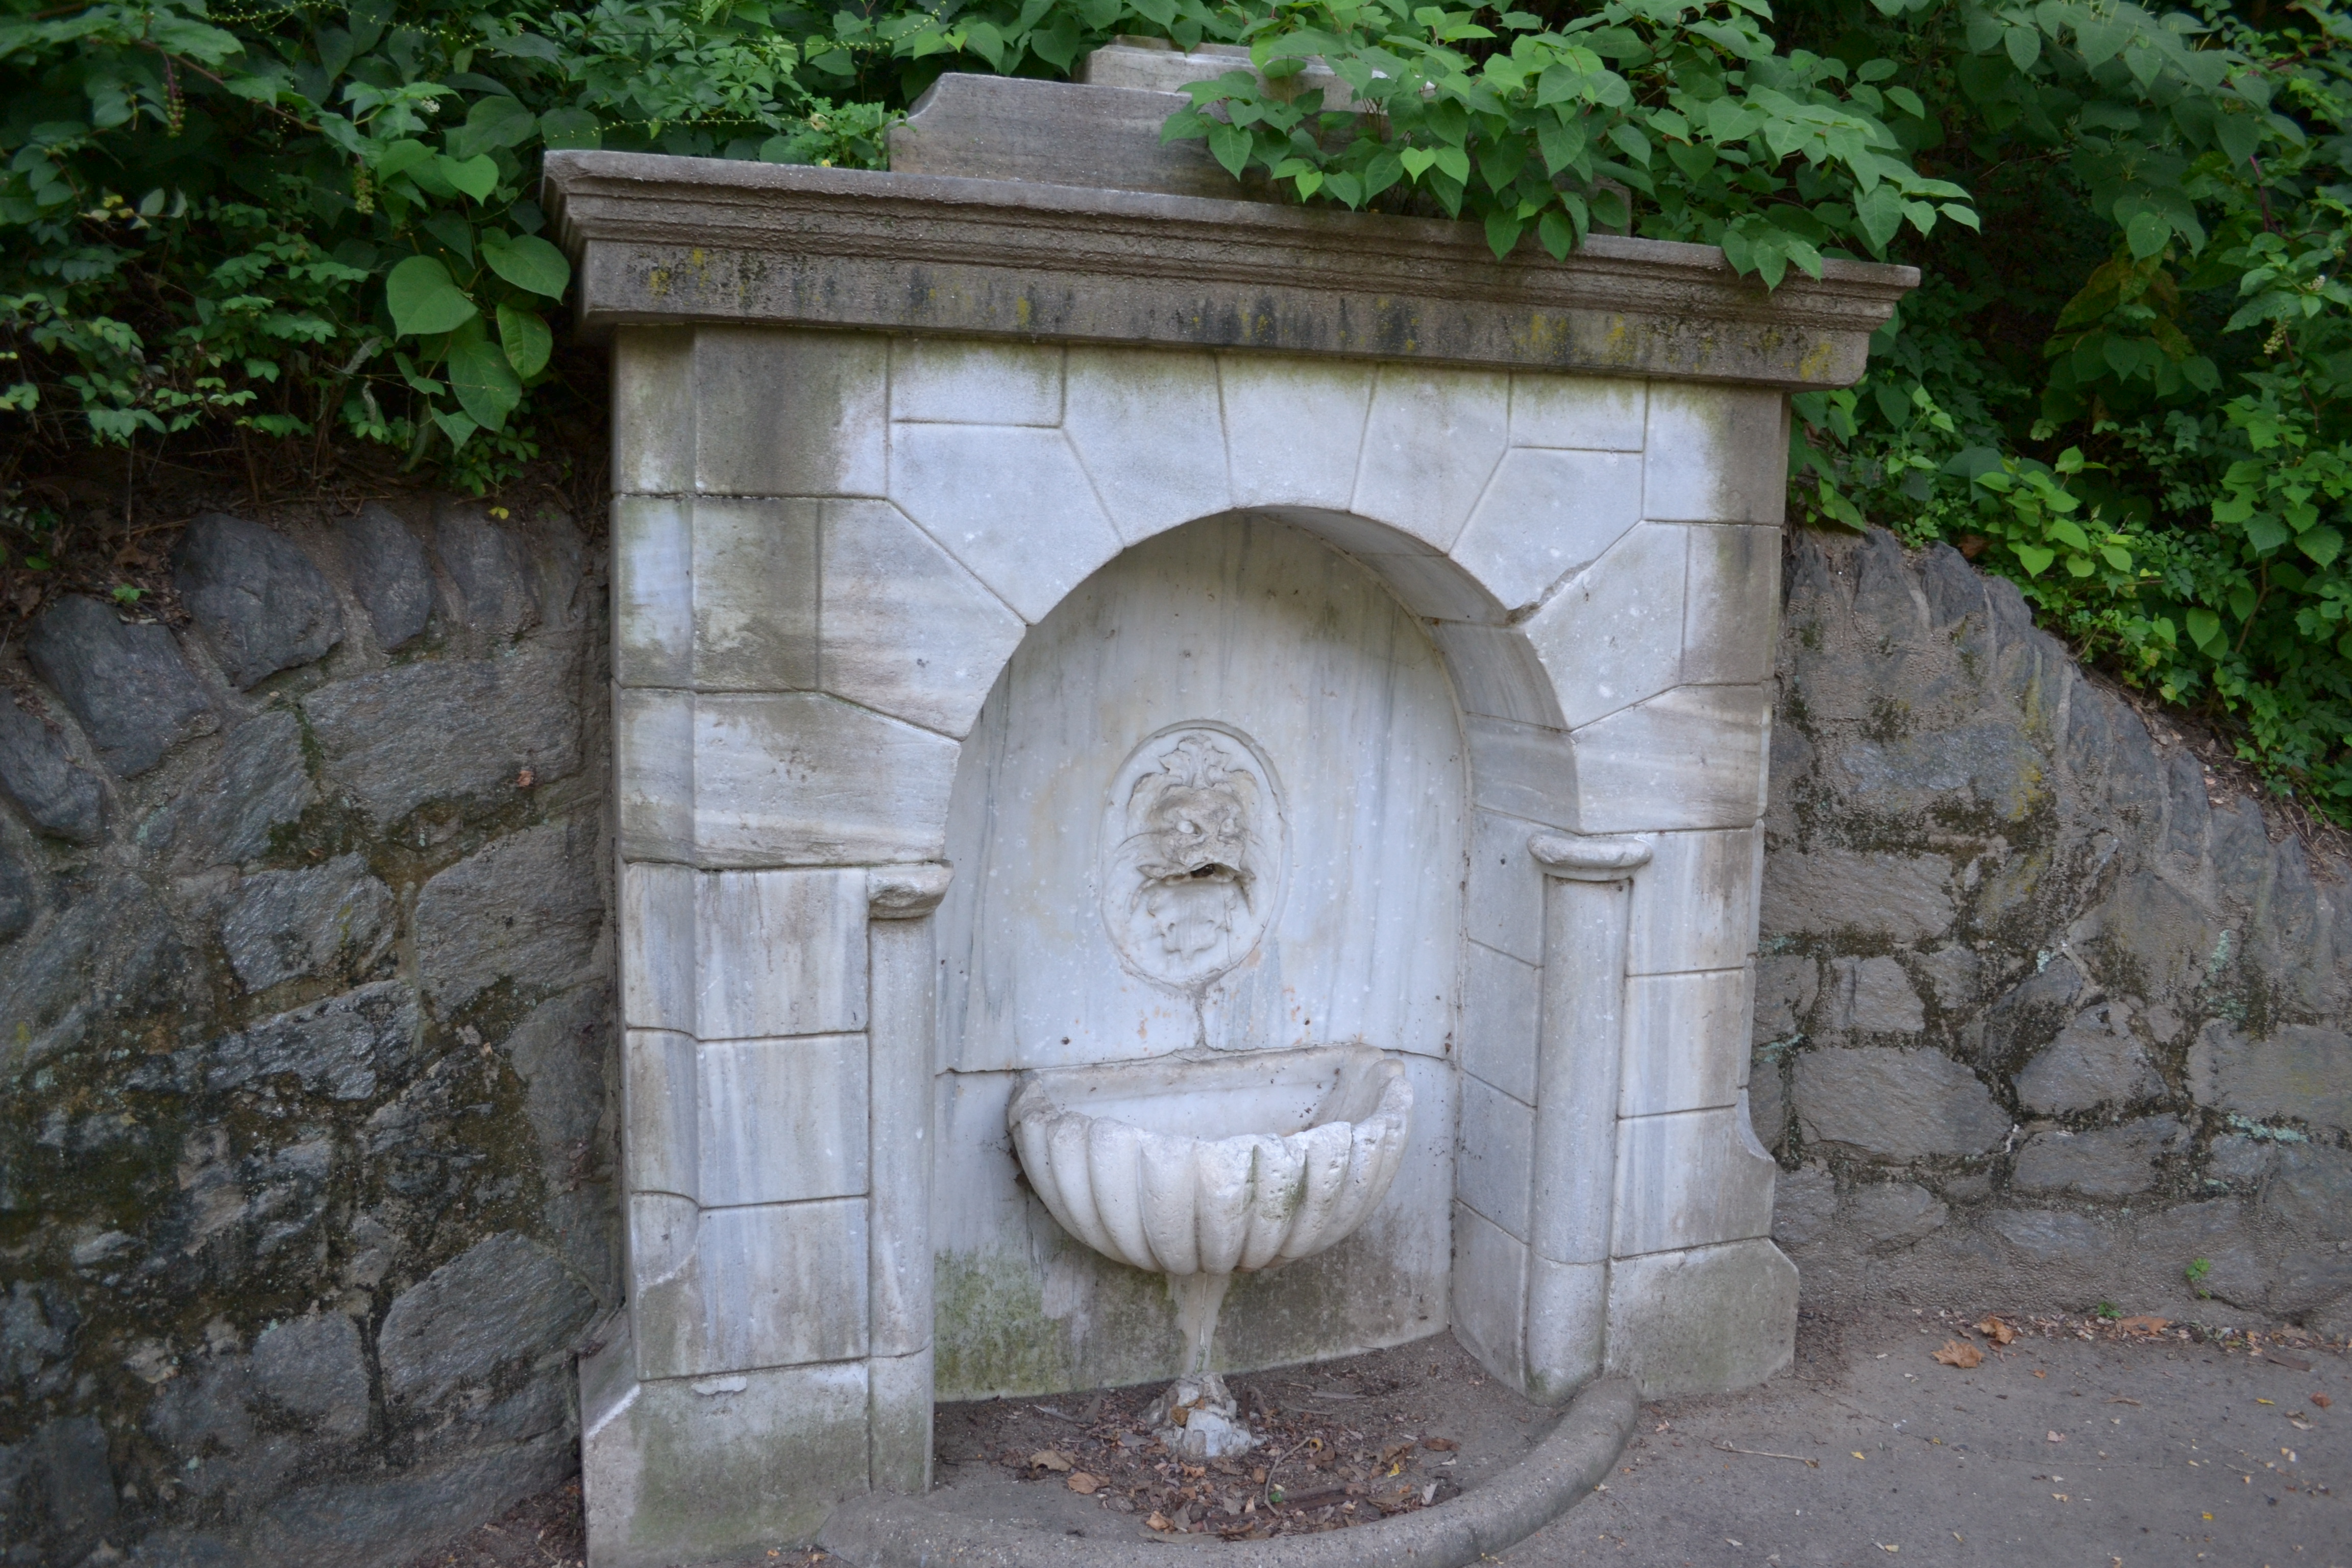 Until the water became too polluted to drink, residents could sip or fill jugs from spring-fed fountains like this one